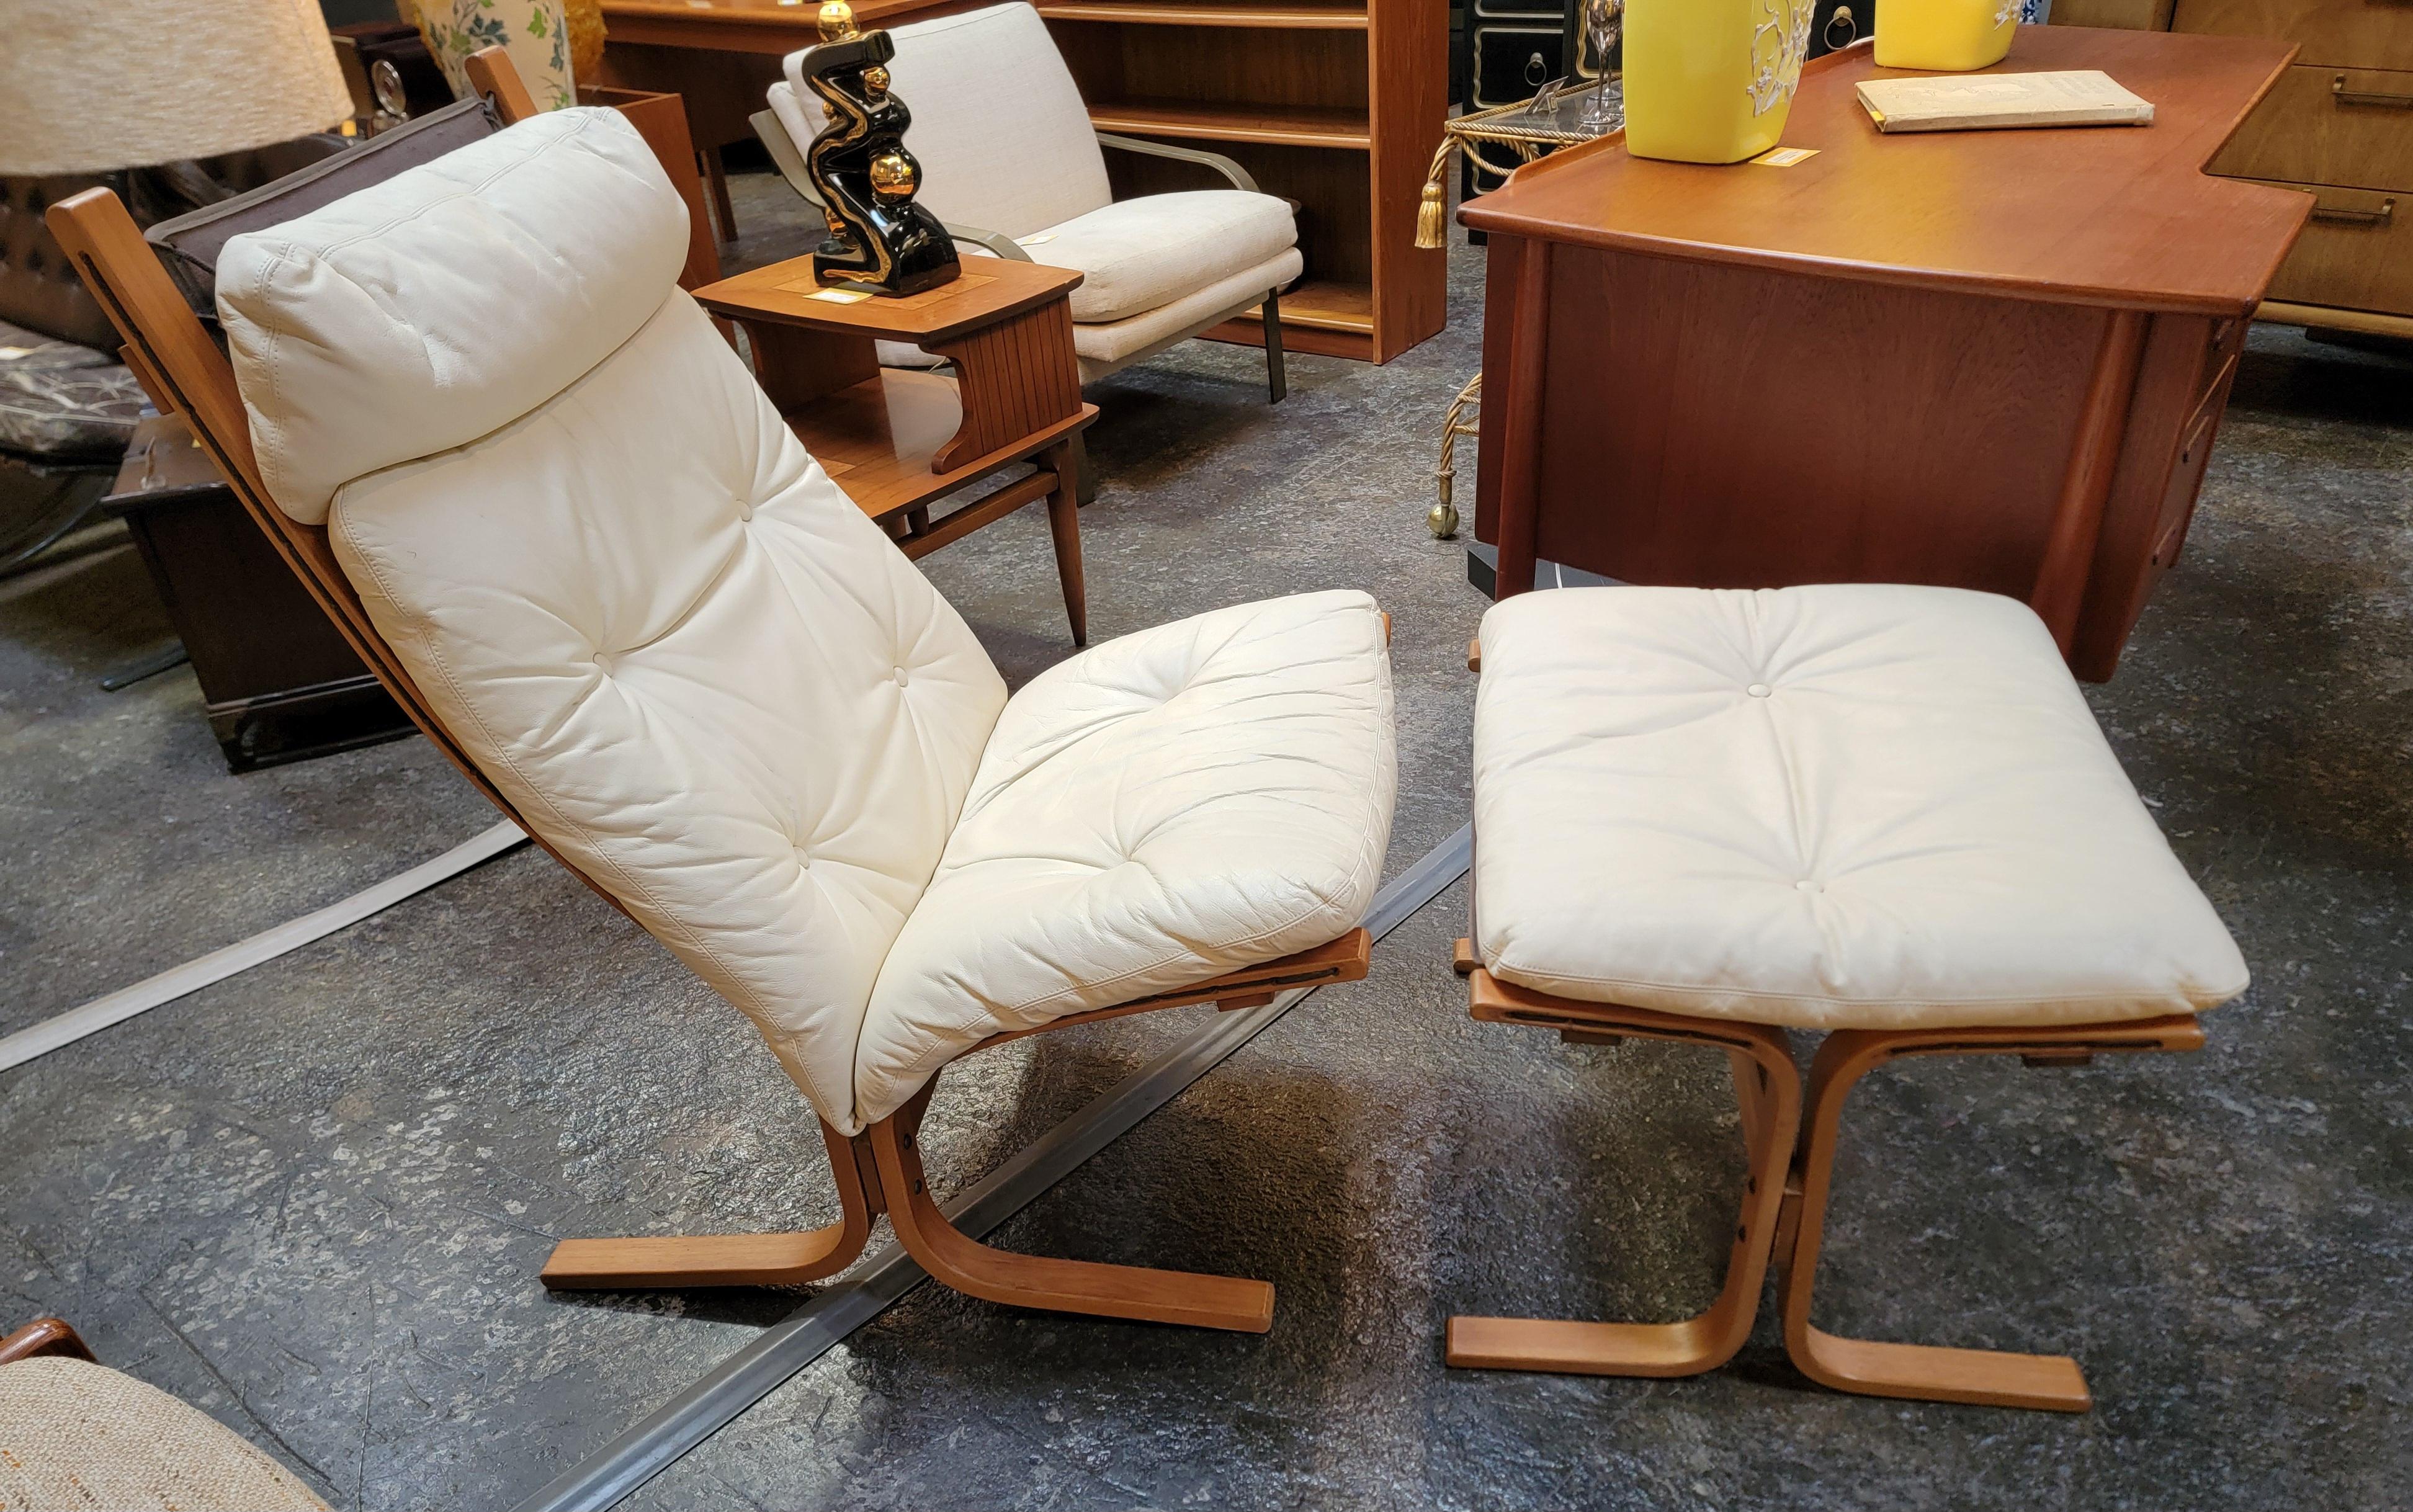 Leather lounge chair and ottoman designed by Ingmar Relling for Westnofa. Circa. 1970's. Original off-white leather upholstery in very good original condition. All canvas seat supports in excellent condition. Retains Westnofa label. Ottoman measures